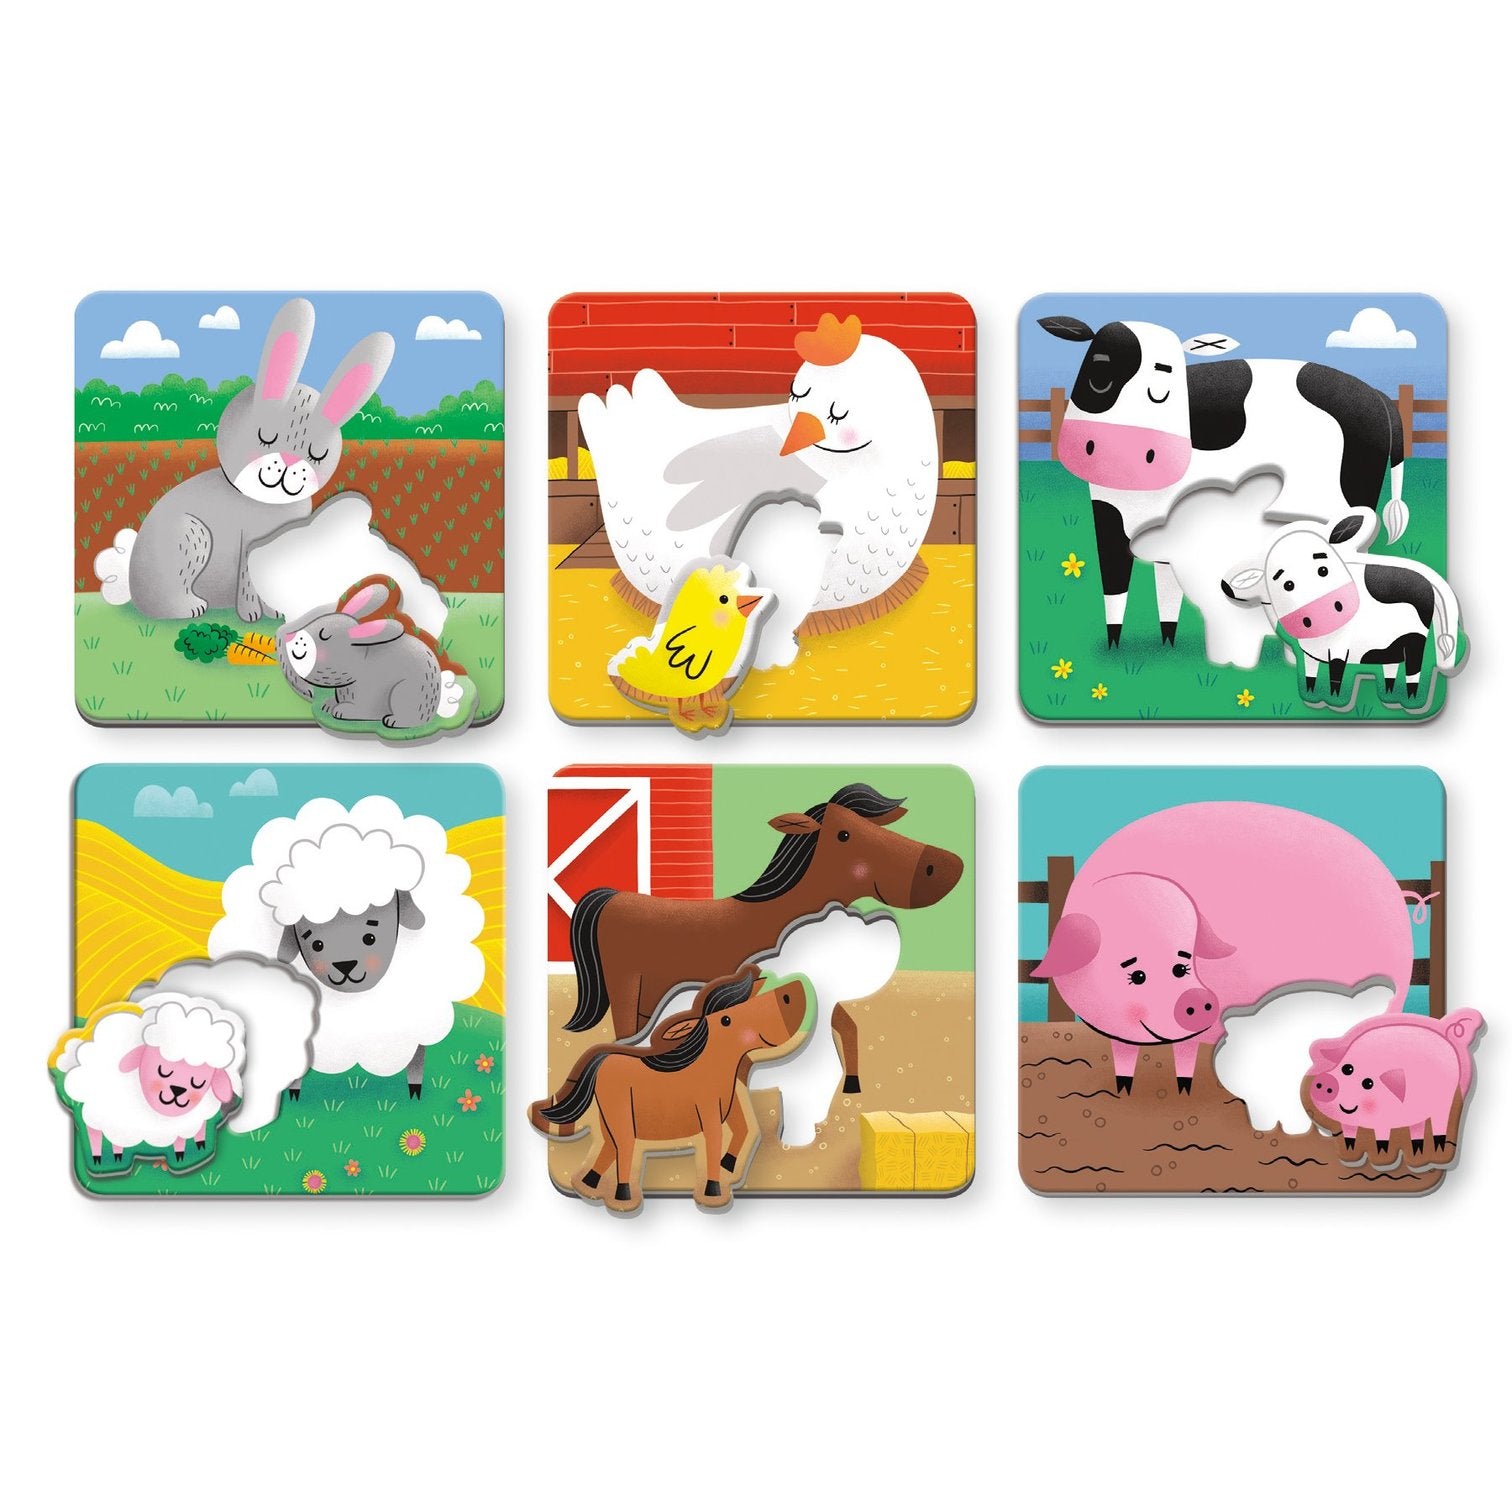 Mud Puppy | Match Up Puzzles - Farm Babies